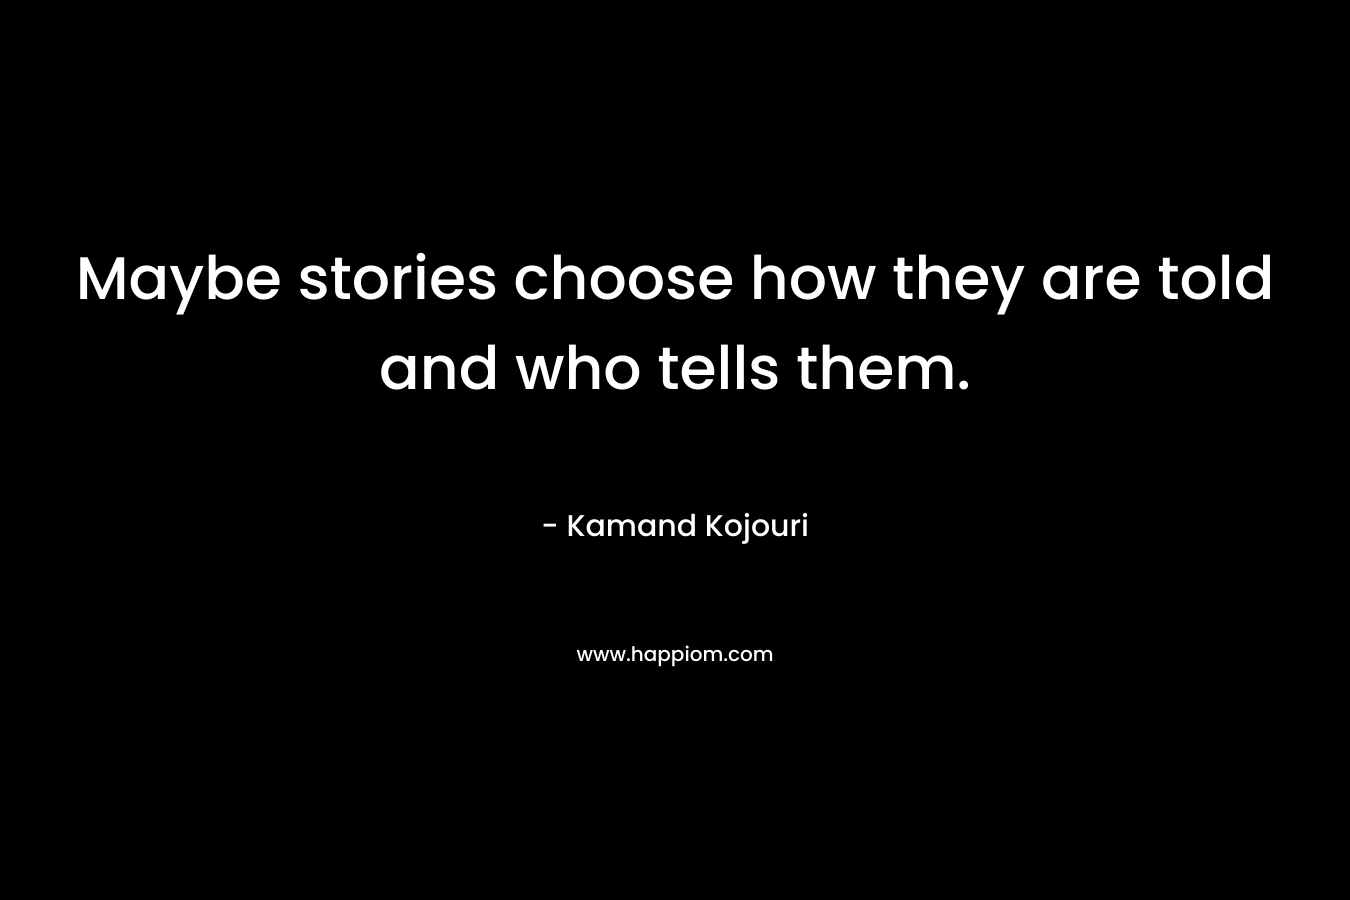 Maybe stories choose how they are told and who tells them.